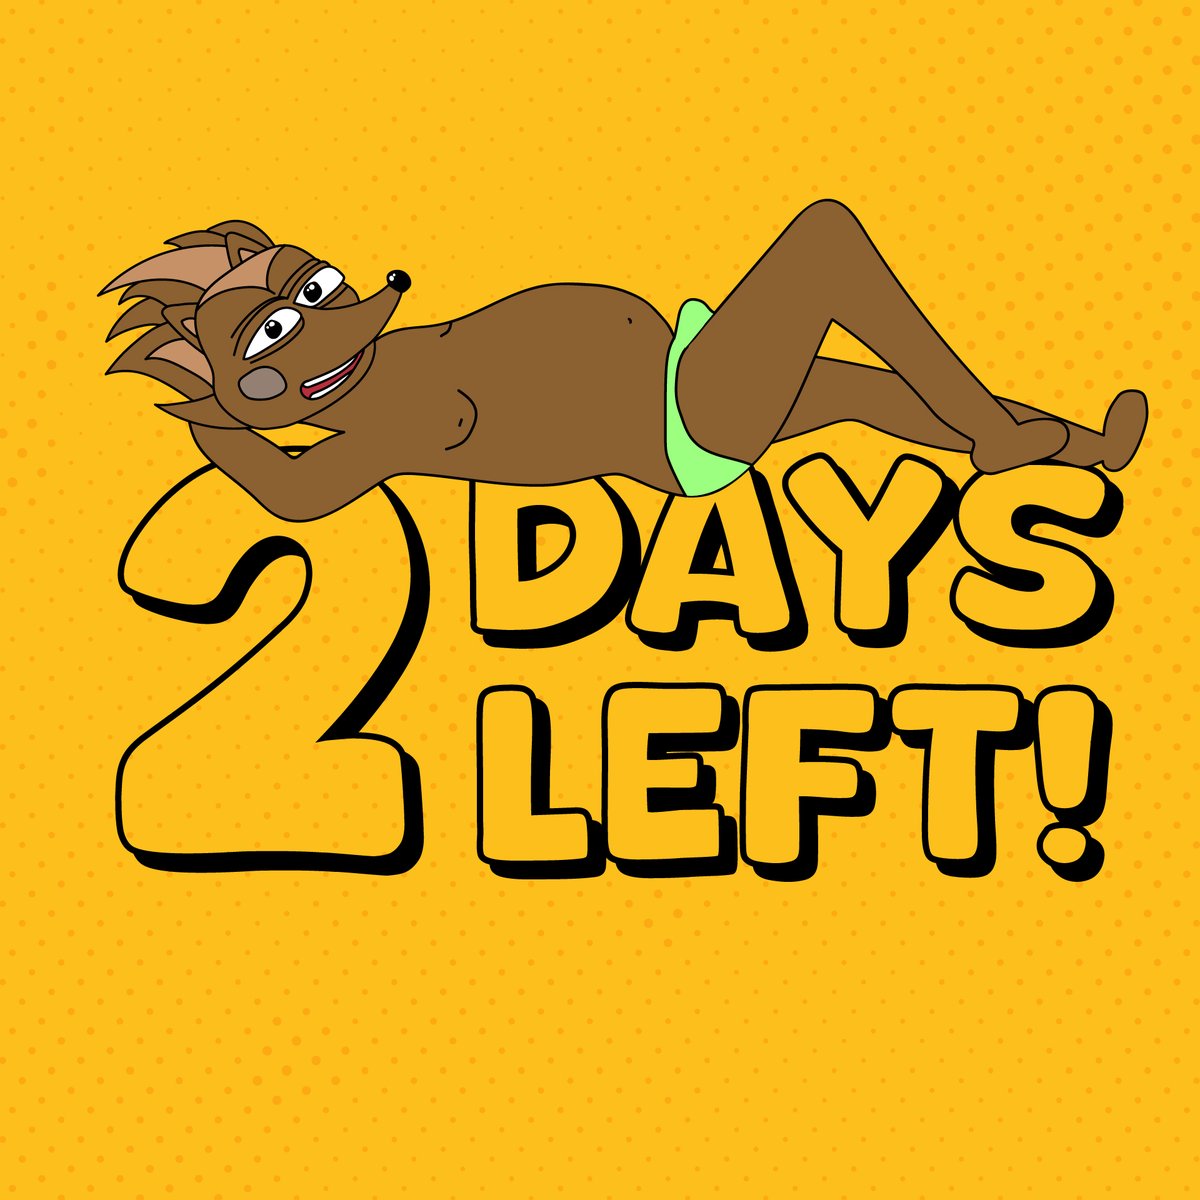 Only 2 days left on our presale! Ends Wednesday 12pm UTC.

Don't miss out!

#SolanaMemeCoins #SOLANA $bonk $wif $wen $mew $duko $peng $pepe $doge #presale #cryptopresale